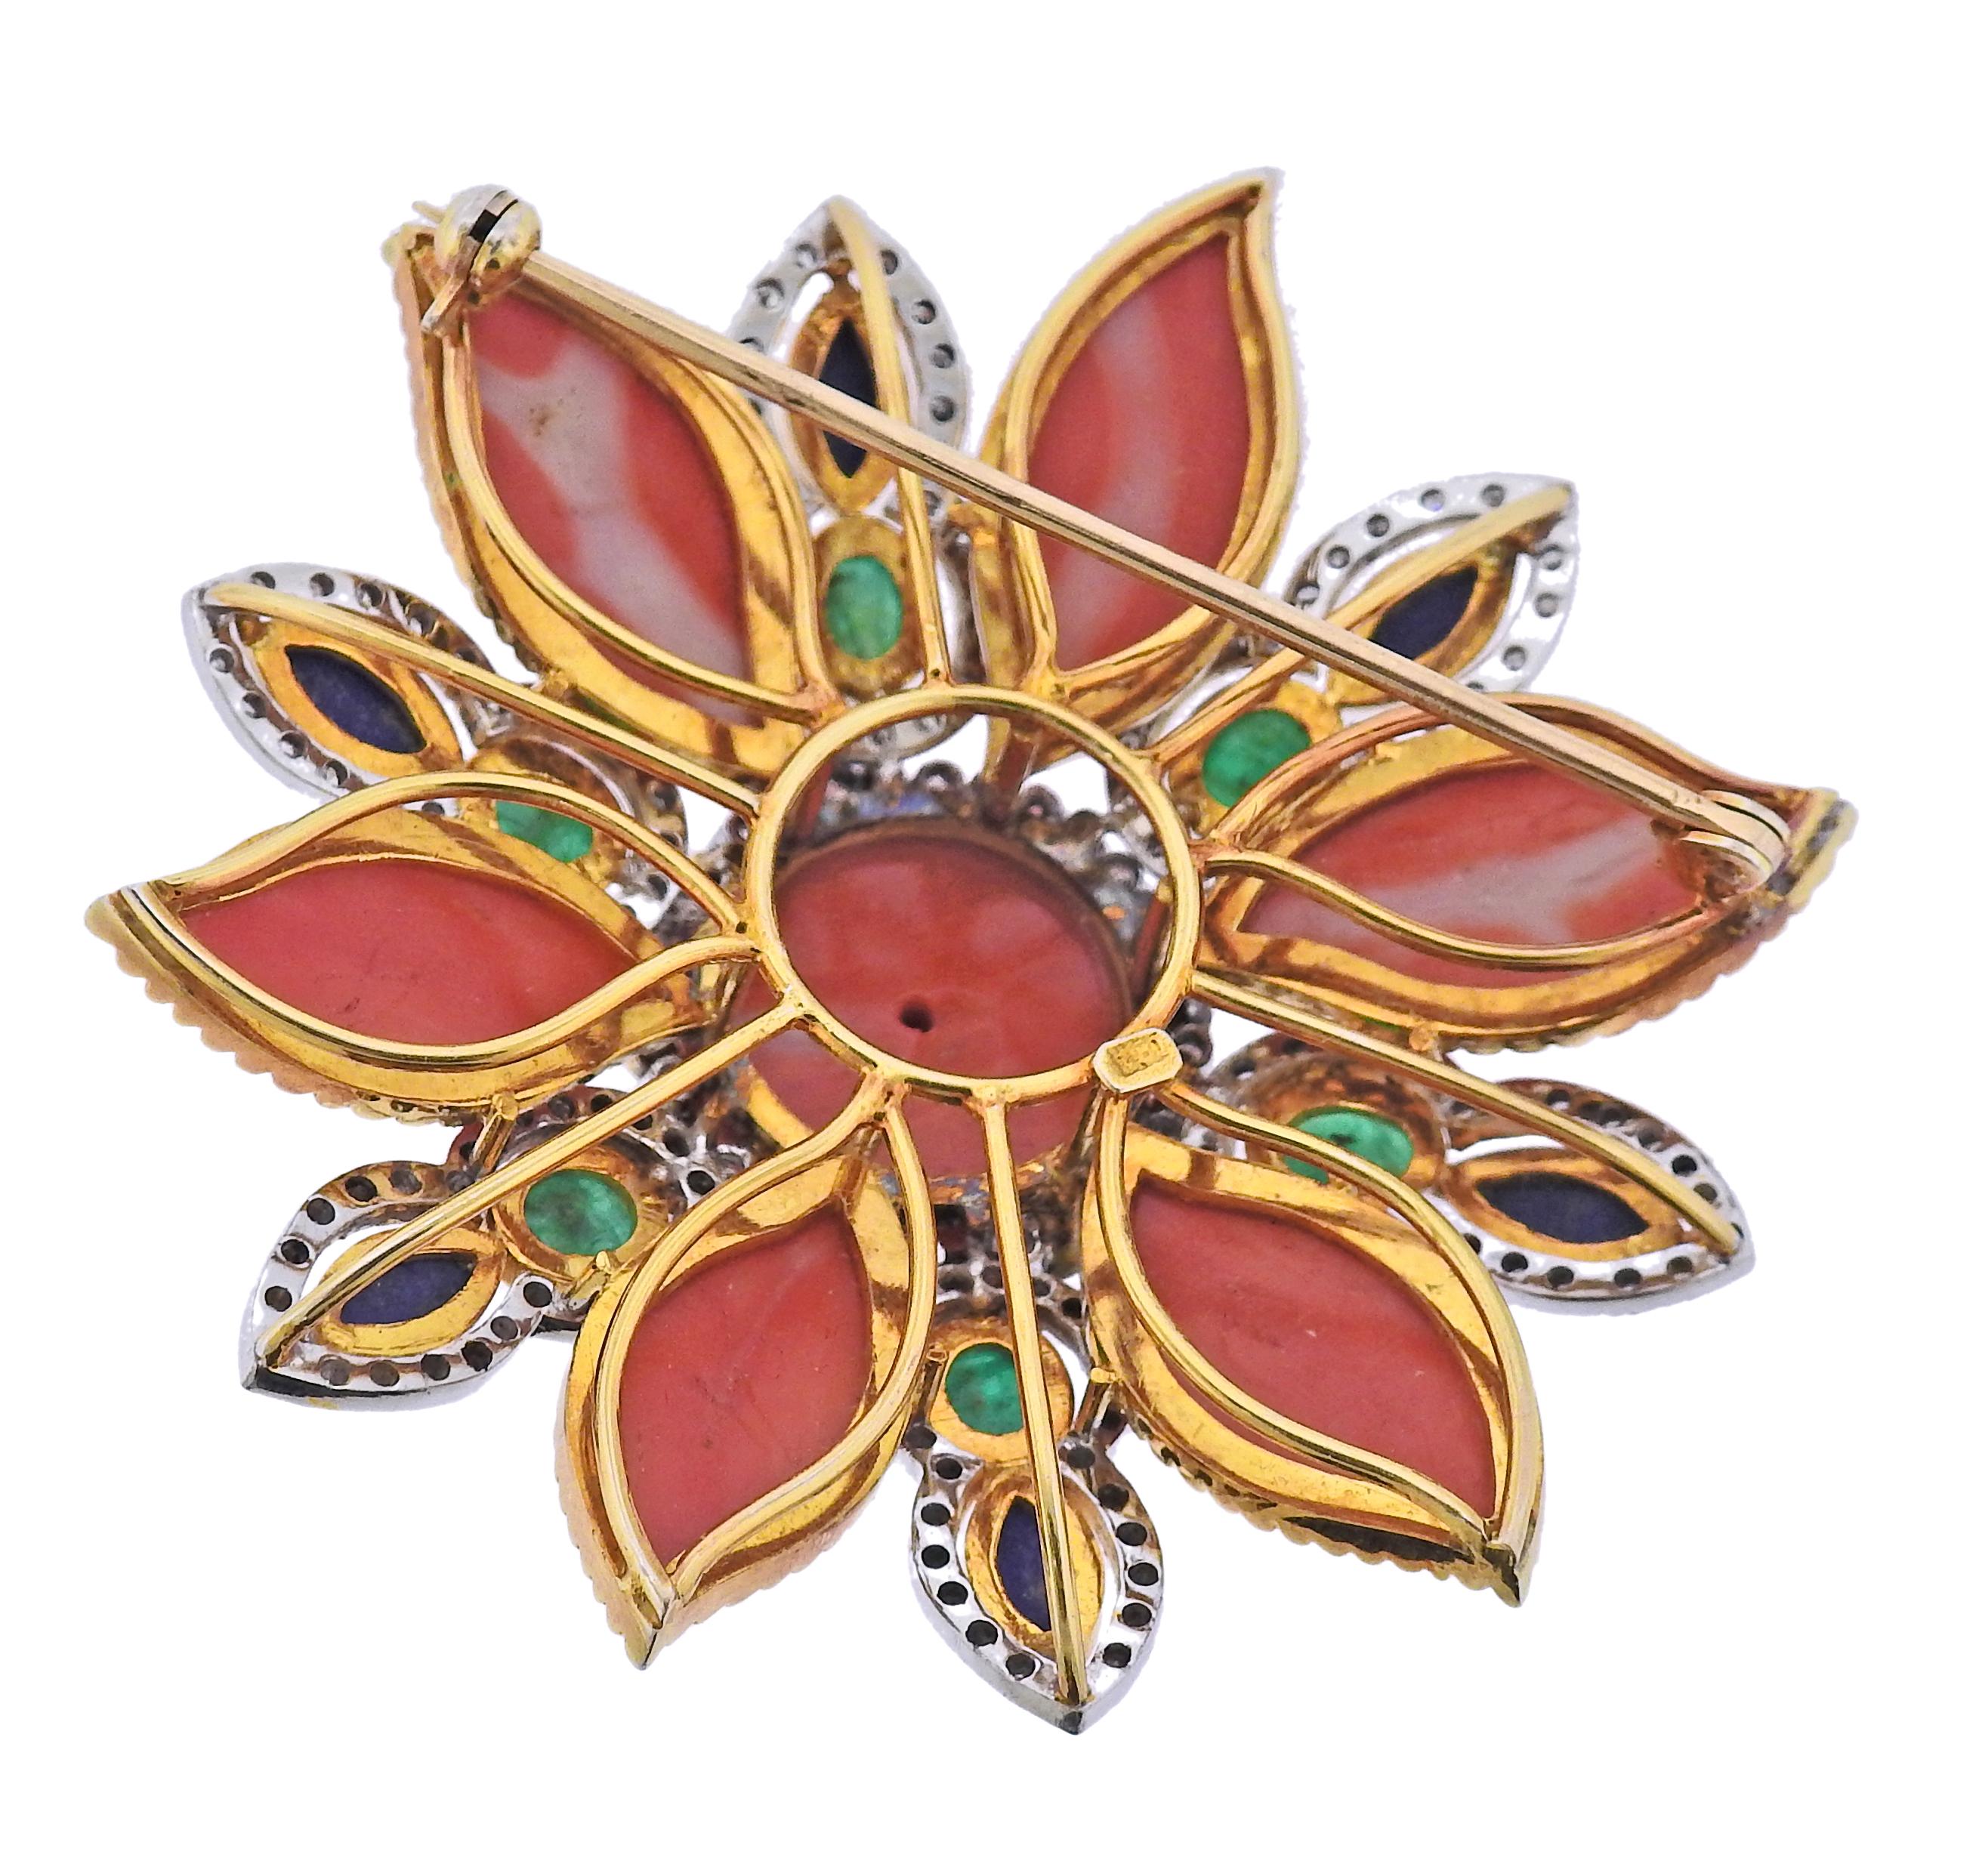 Vintage, circa 1960s 18k gold large brooch, set with coral, lapis, emerald and approx. 2.00ctw in Si1/Si2-H diamonds. Brooch is 62mm x 62mm. Weight - 50.2 grams. Marked 18k.